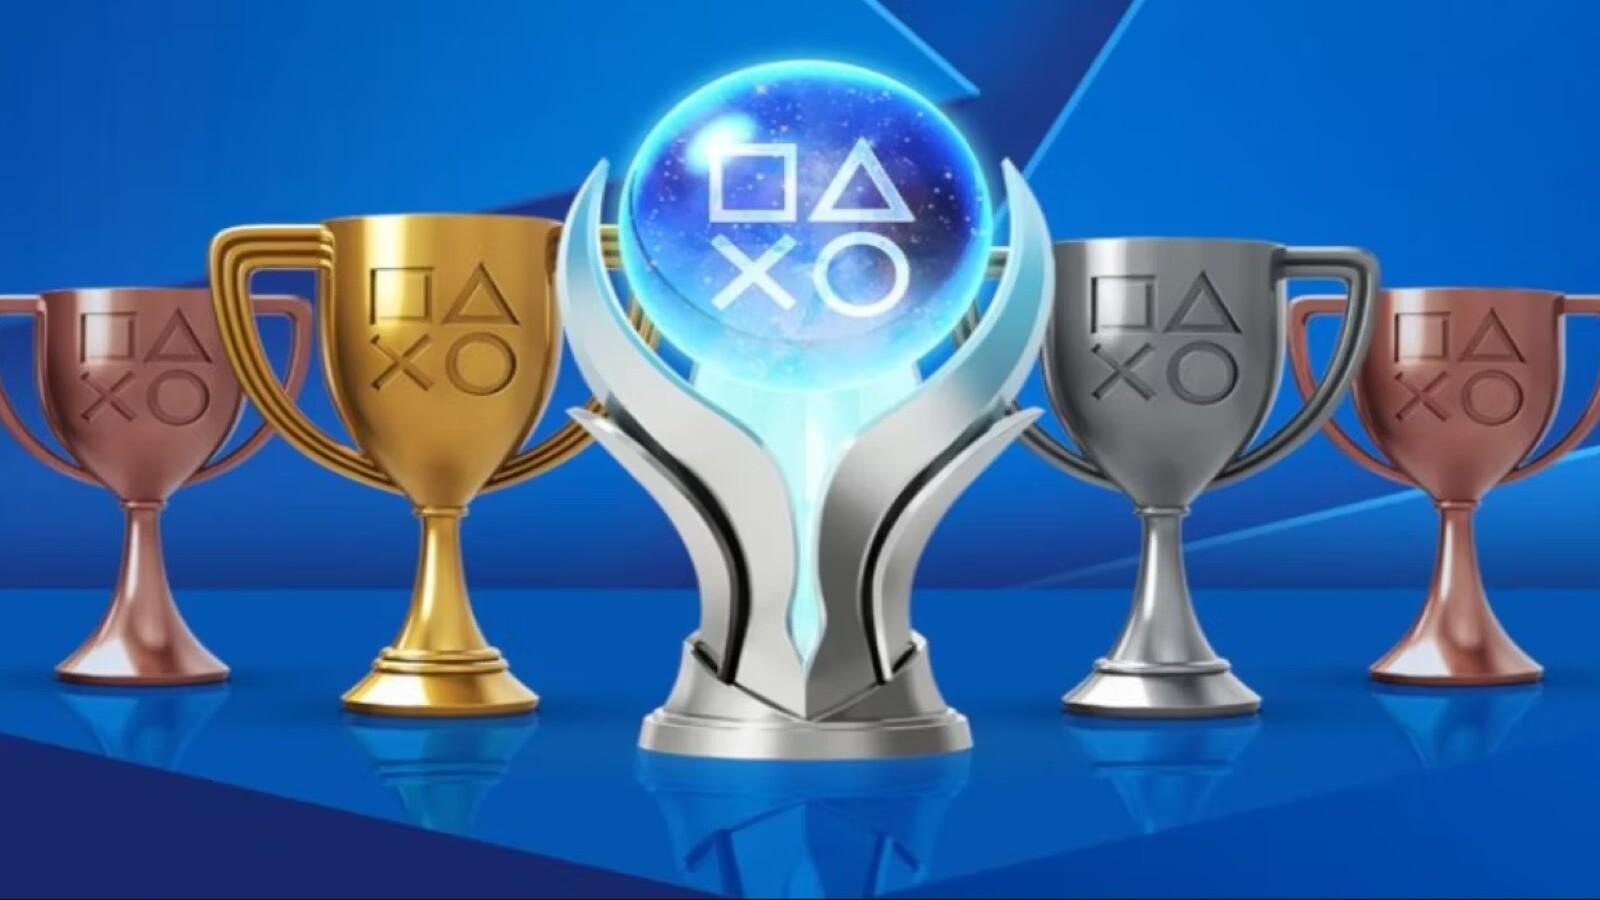 Playstation Trophy Guides - Microsoft Apps